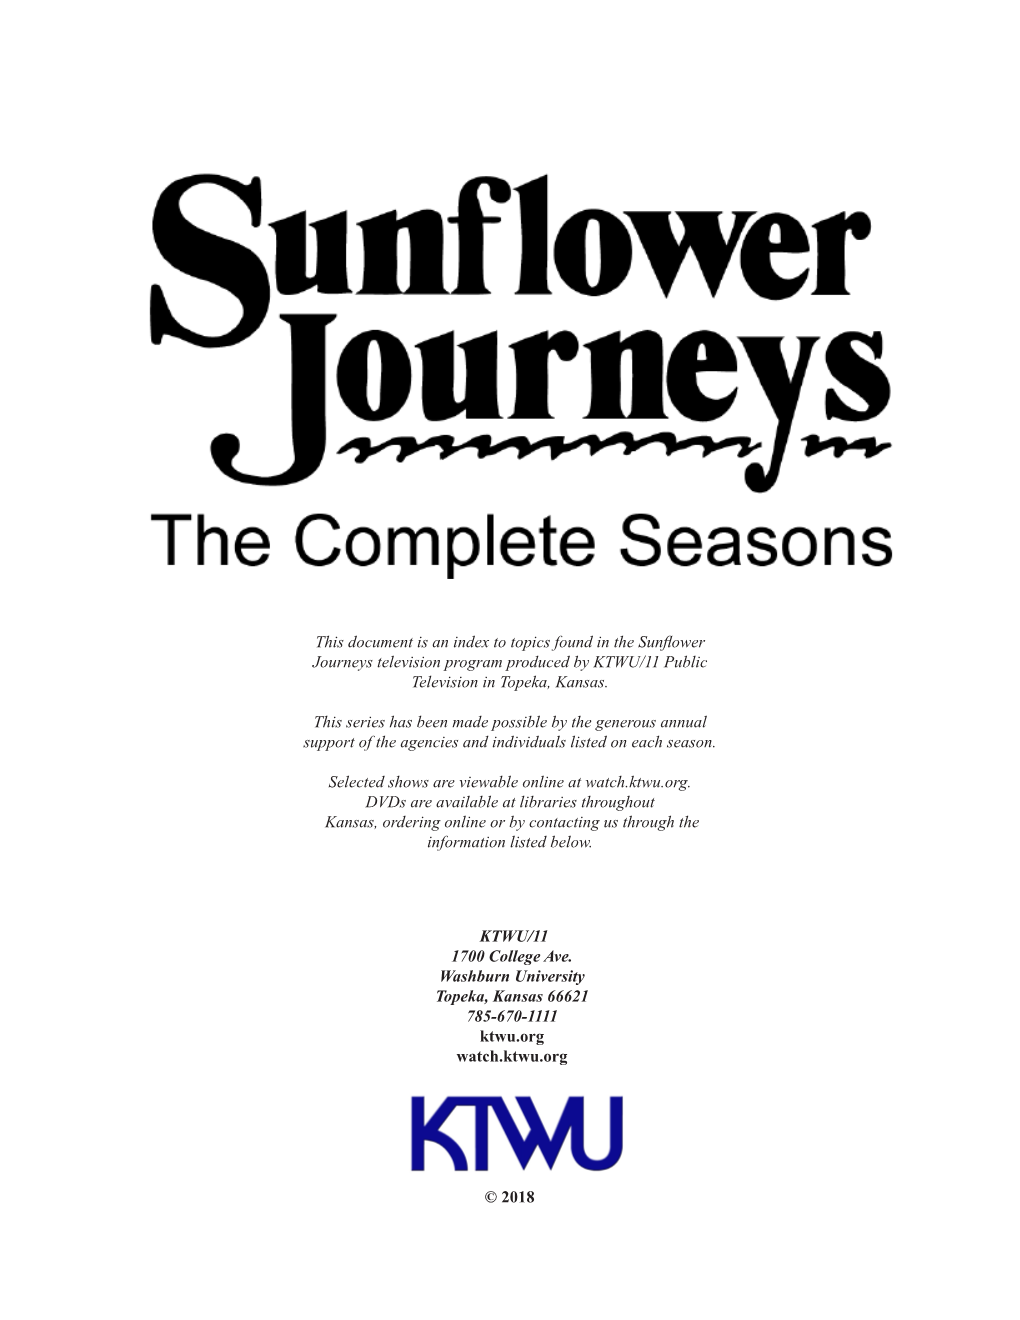 This Document Is an Index to Topics Found in the Sunflower Journeys Television Program Produced by KTWU/11 Public Television In